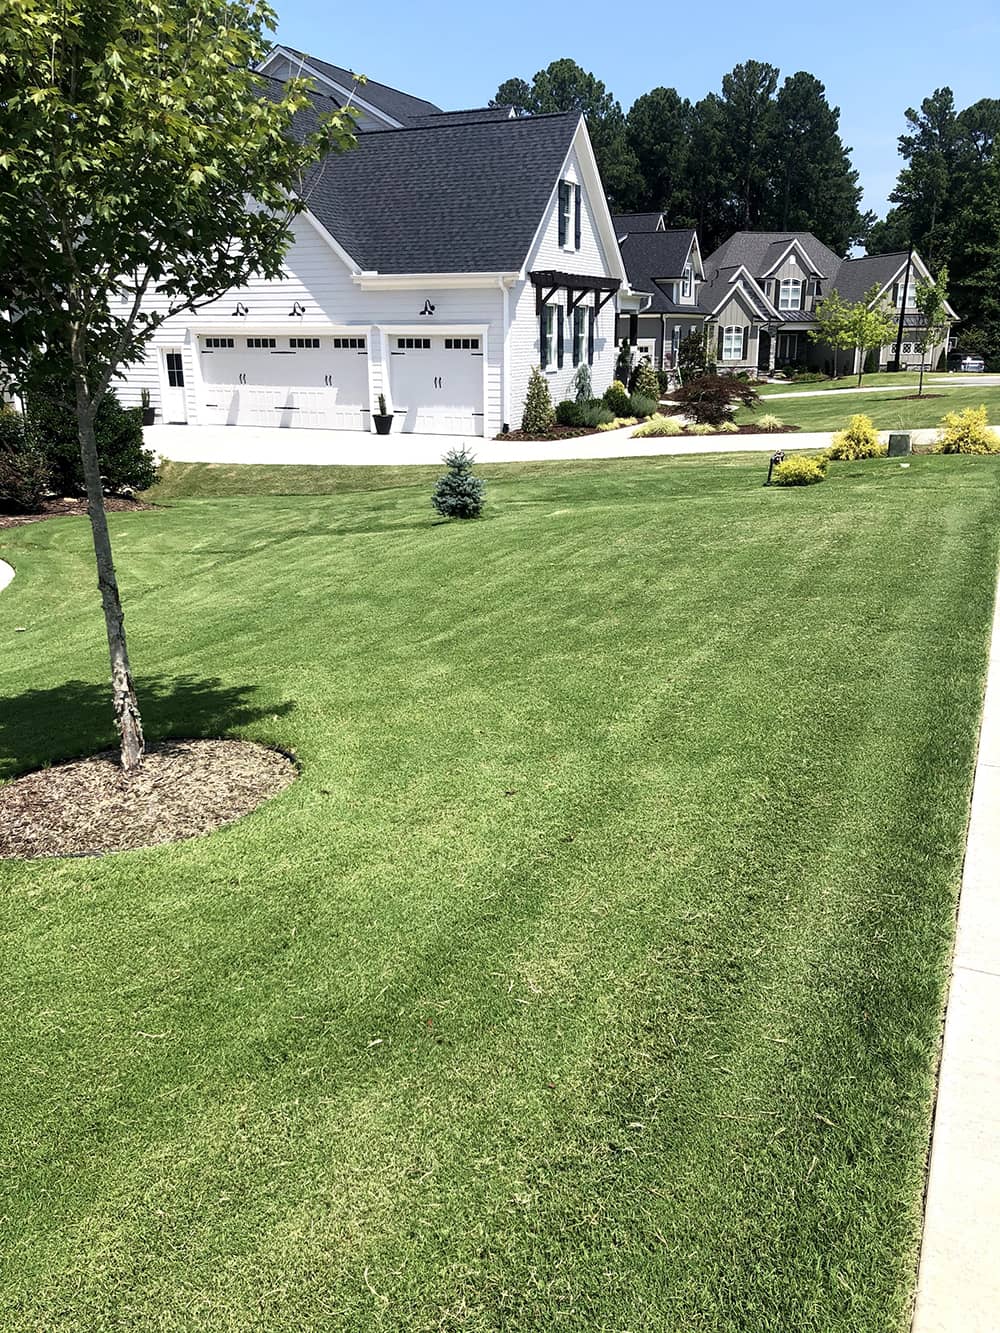 White Home with Lawn Care and Trimmed Tree and Bushes